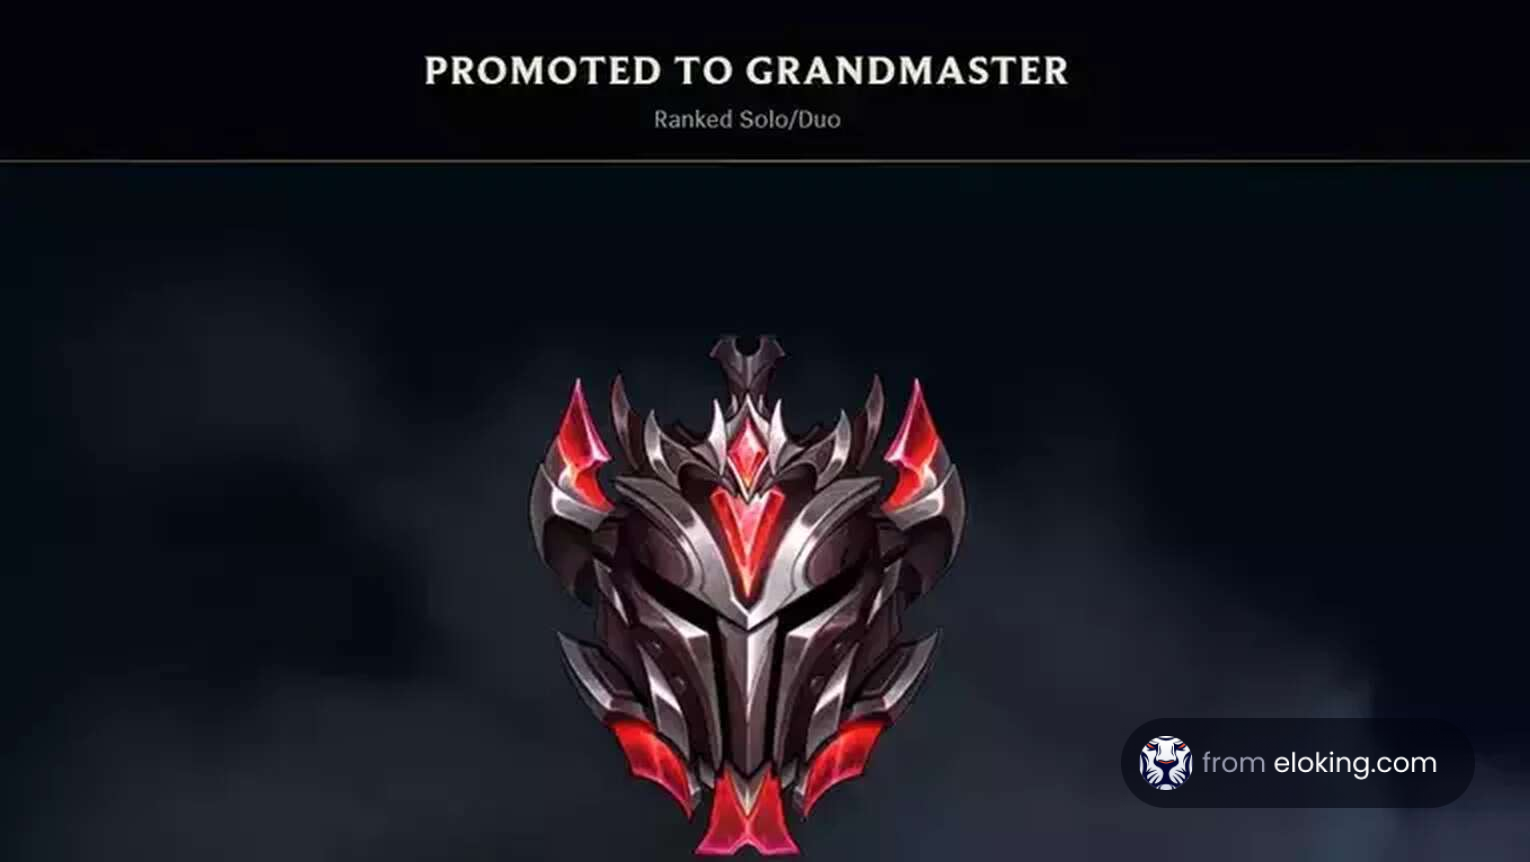 Promoted to Grandmaster in Ranked Solo/Duo